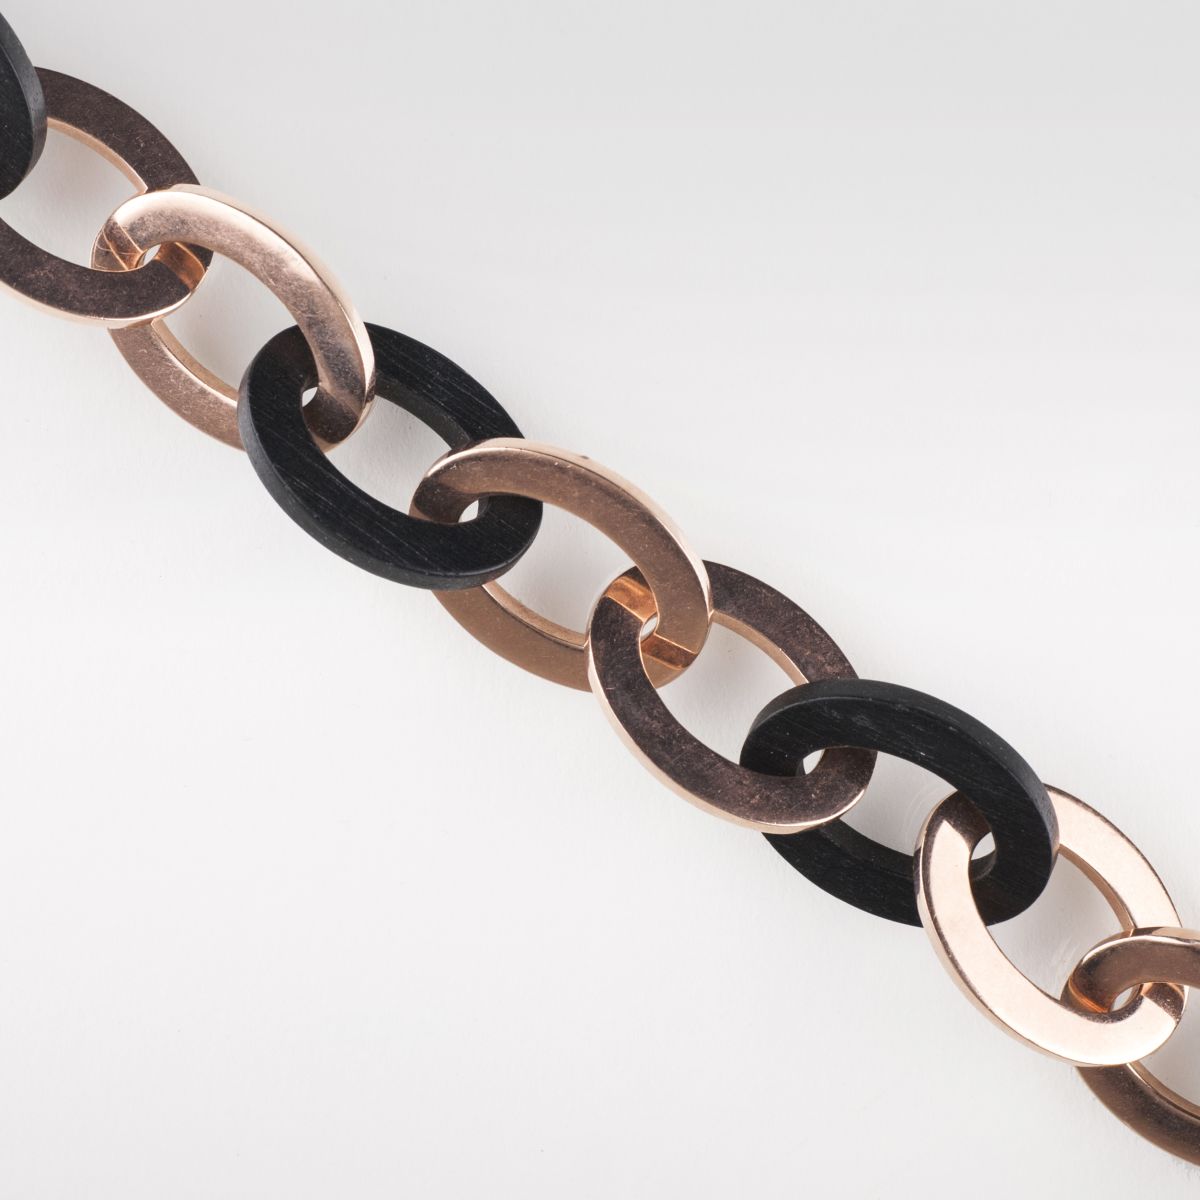 A redgold bracelet with wooden chain links